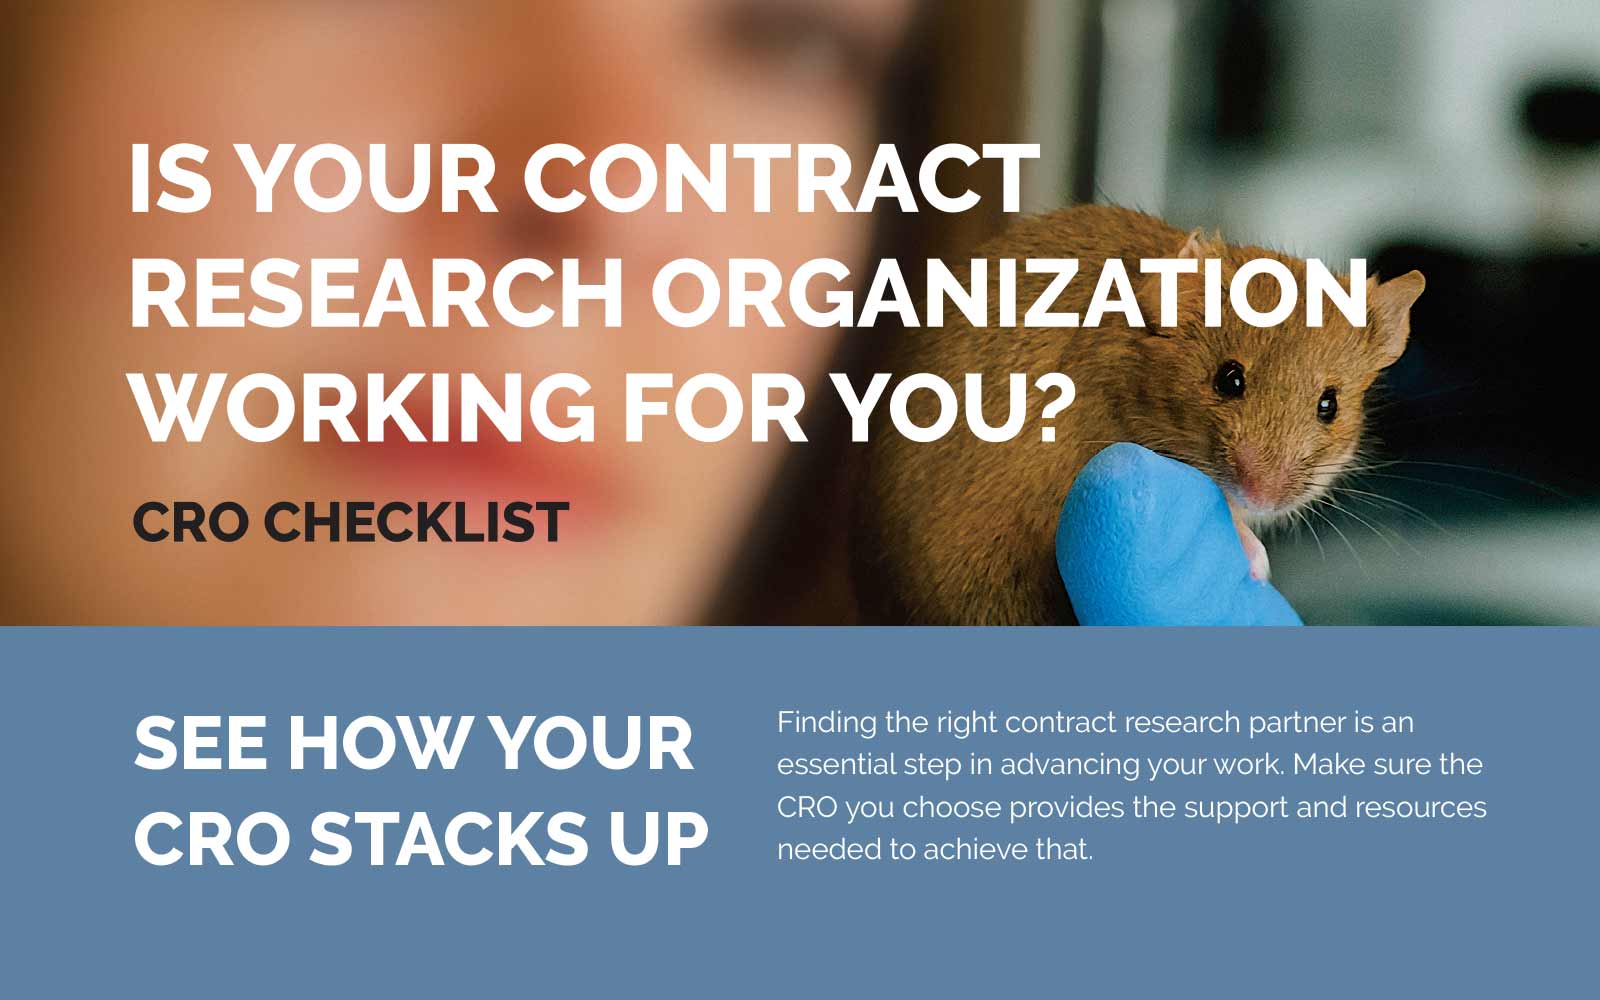 Featured image for “Is Your Contract Research Organization Working for You?”